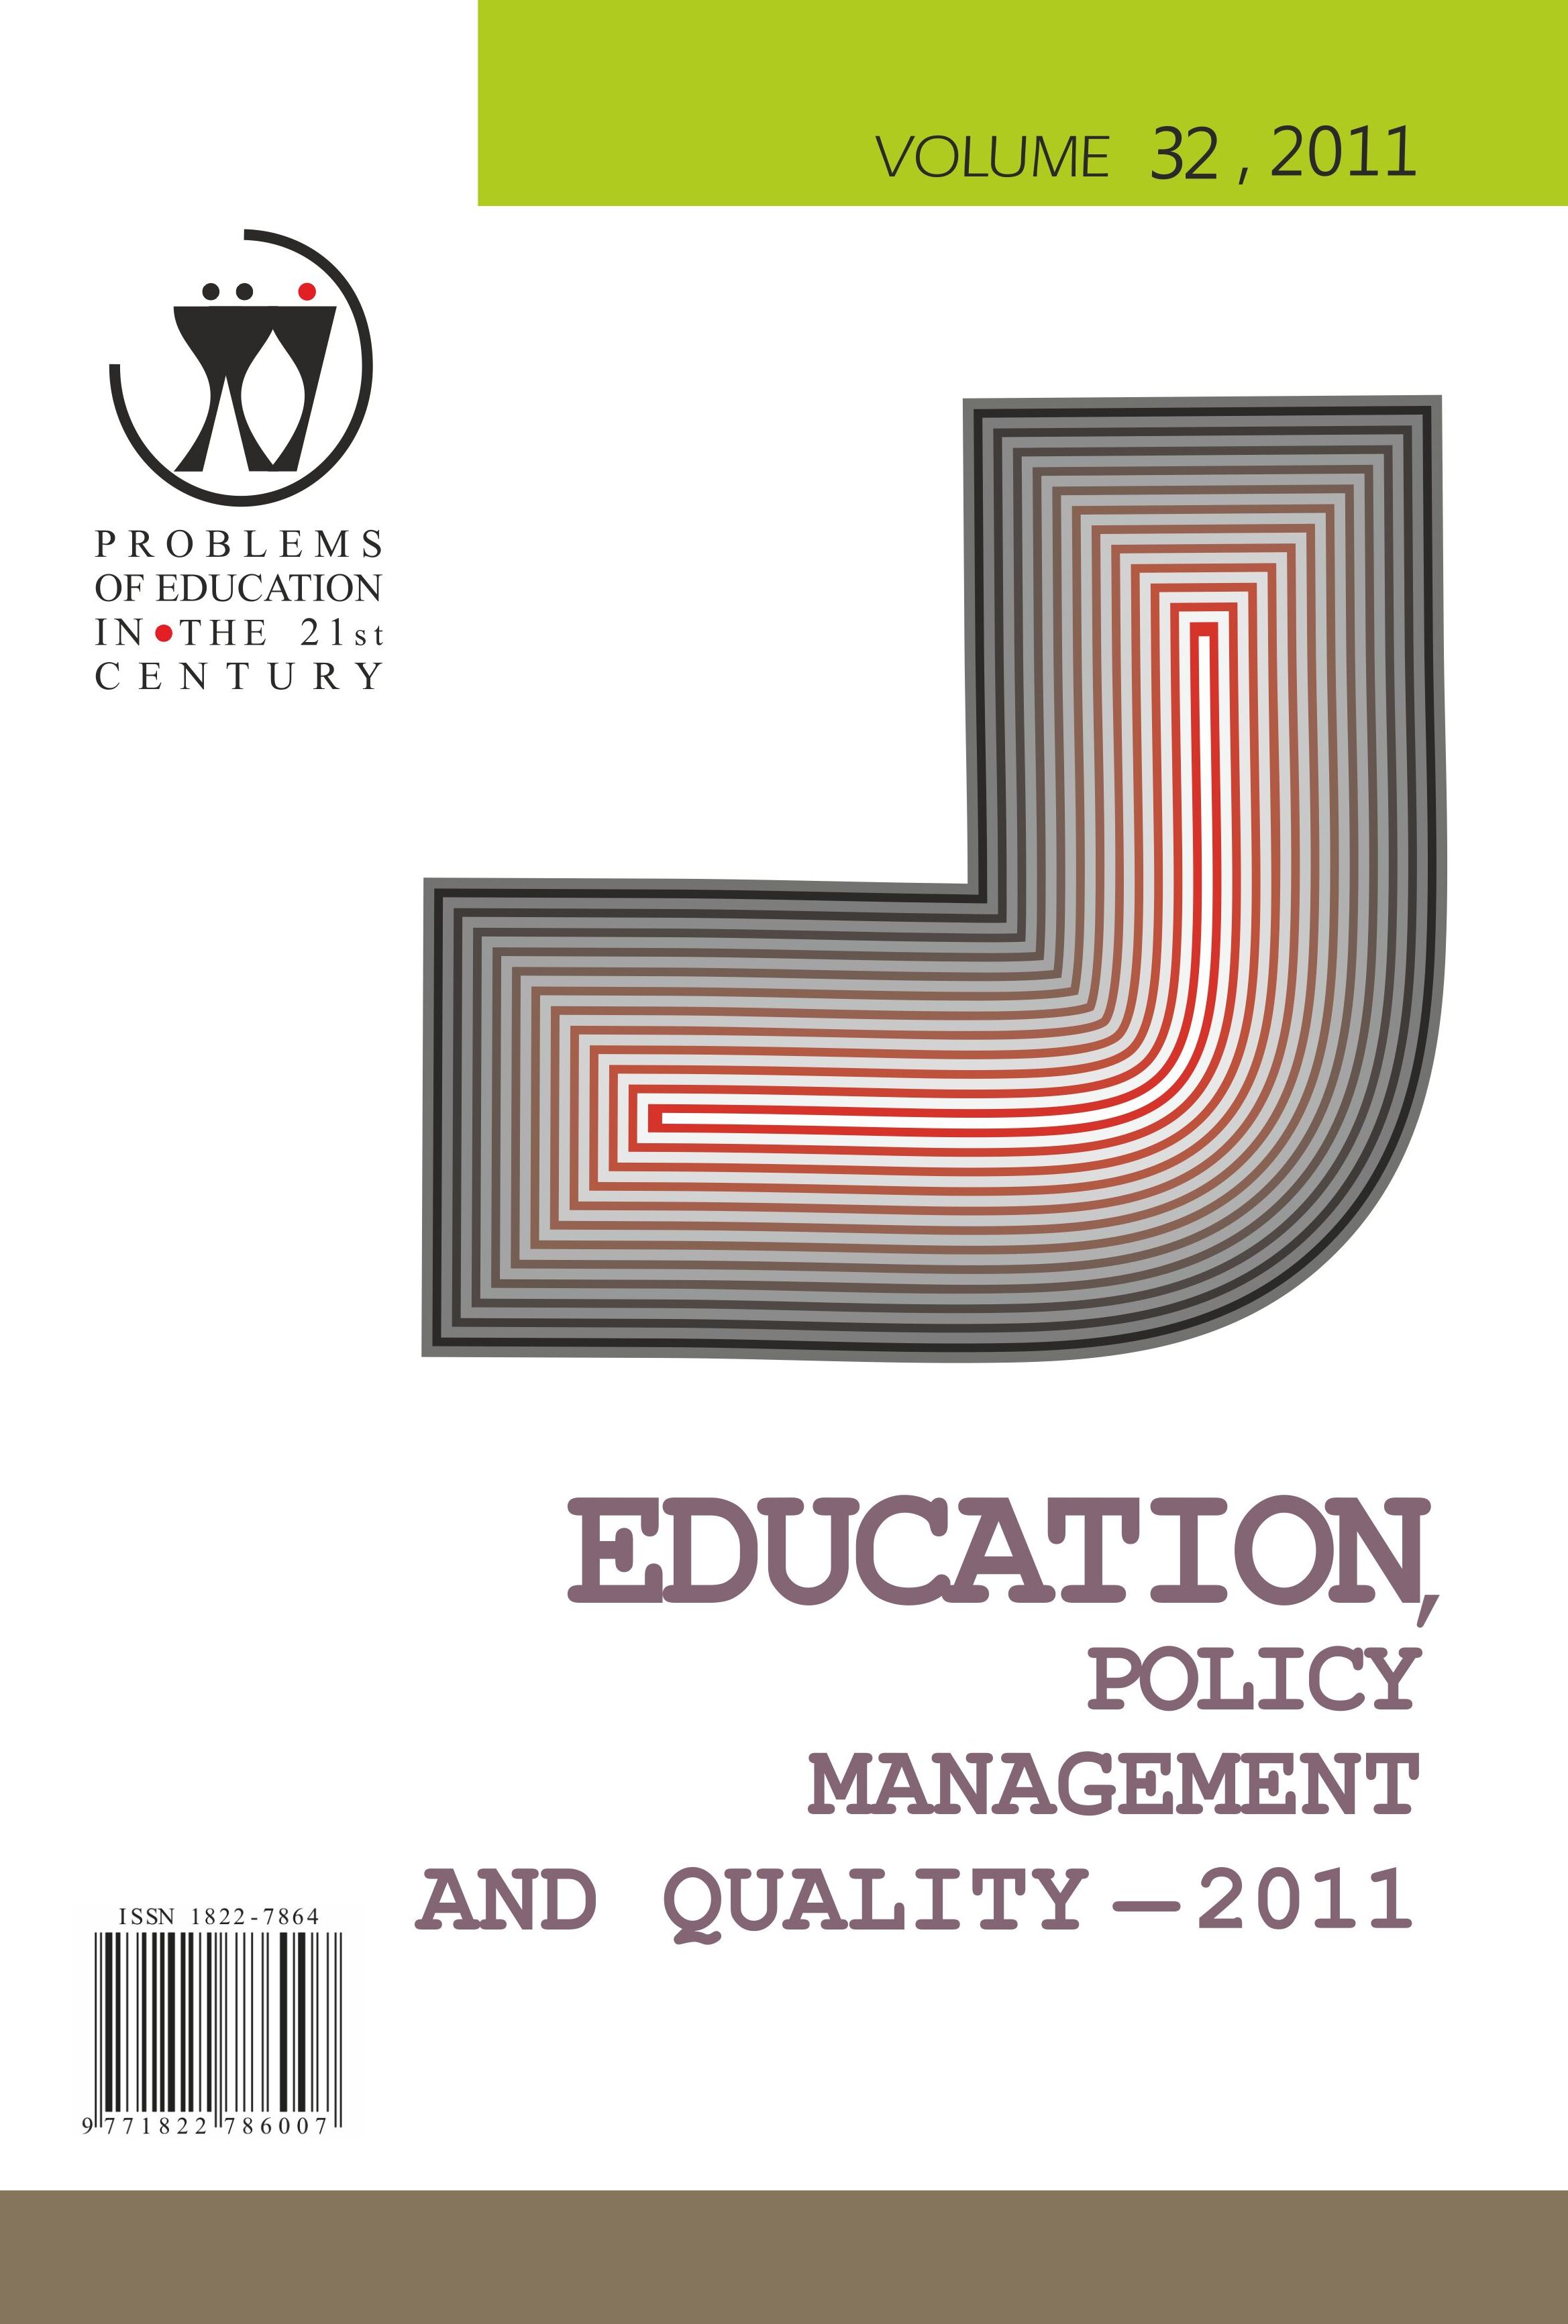 RETHINKING OF KNOWLEDGE MANAGEMENT INTRODUCTION AT TEACHING UNIVERSITIES: THE FRAMEWORK DEVELOPMENT Cover Image